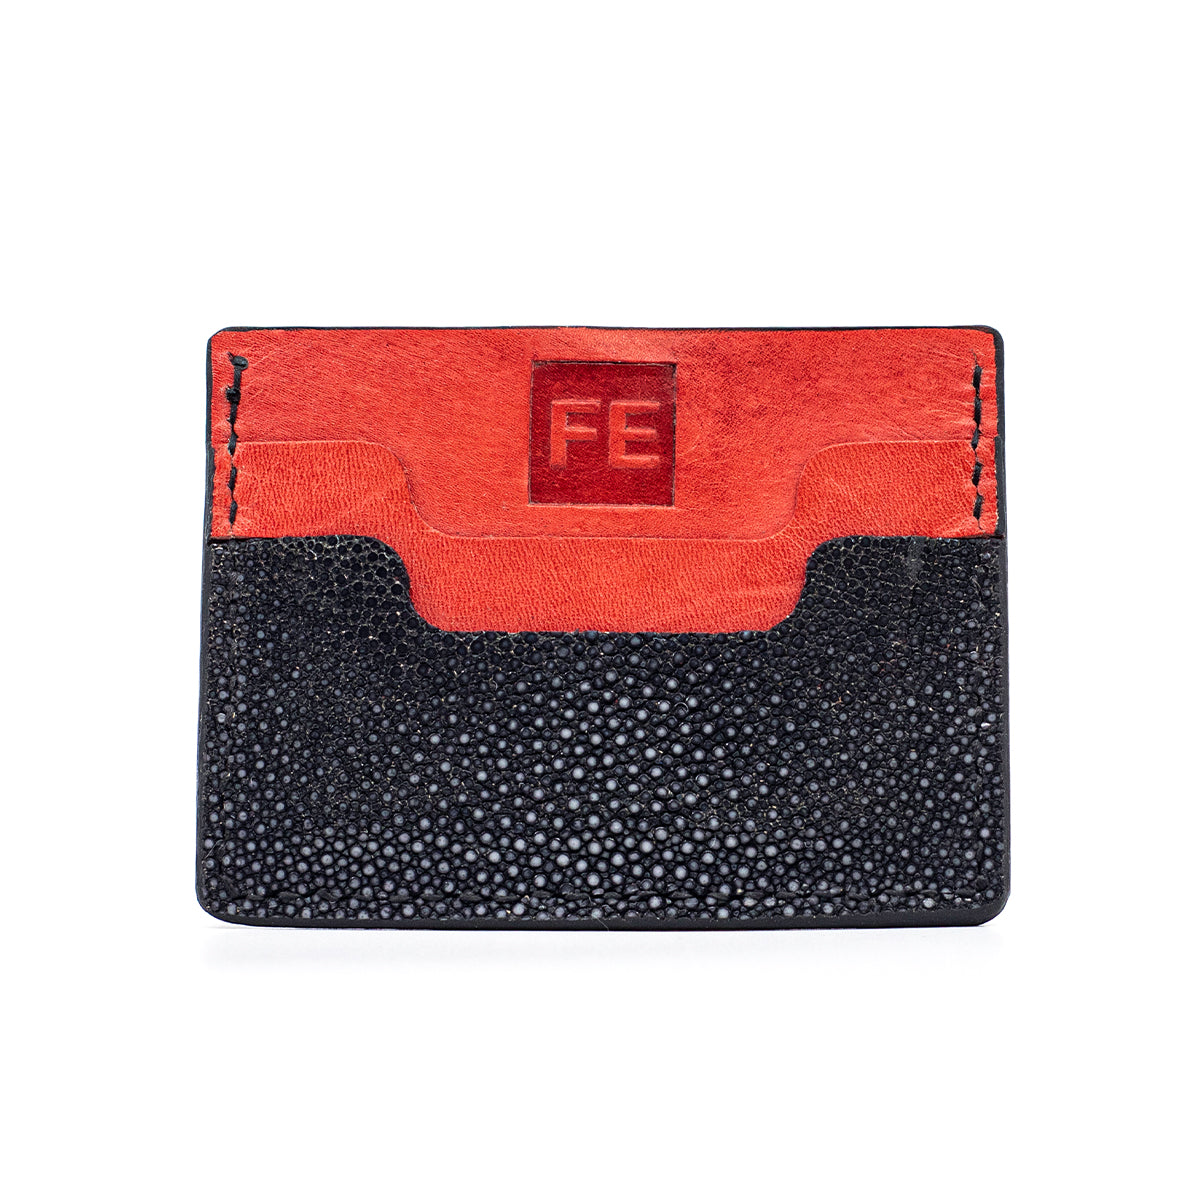 The Eve Stirwin Wallet